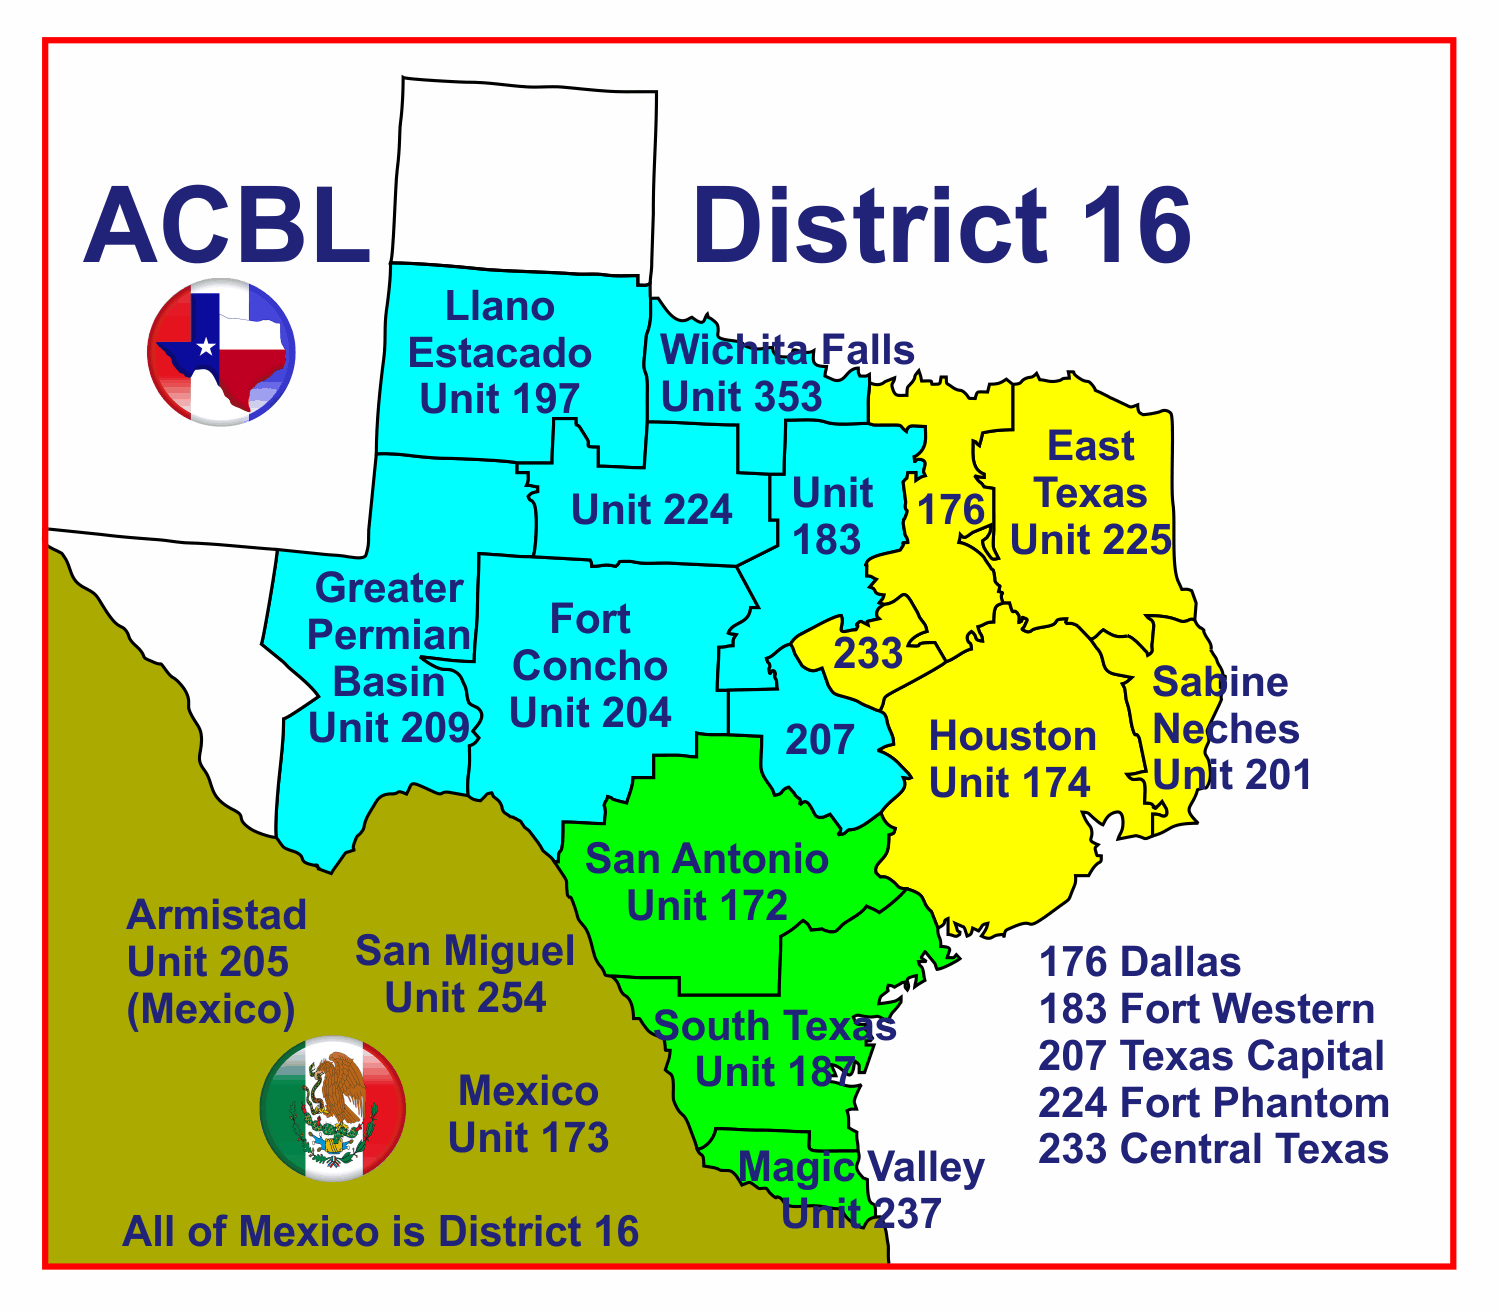 District 16 map - Unit 225 covers East Texas